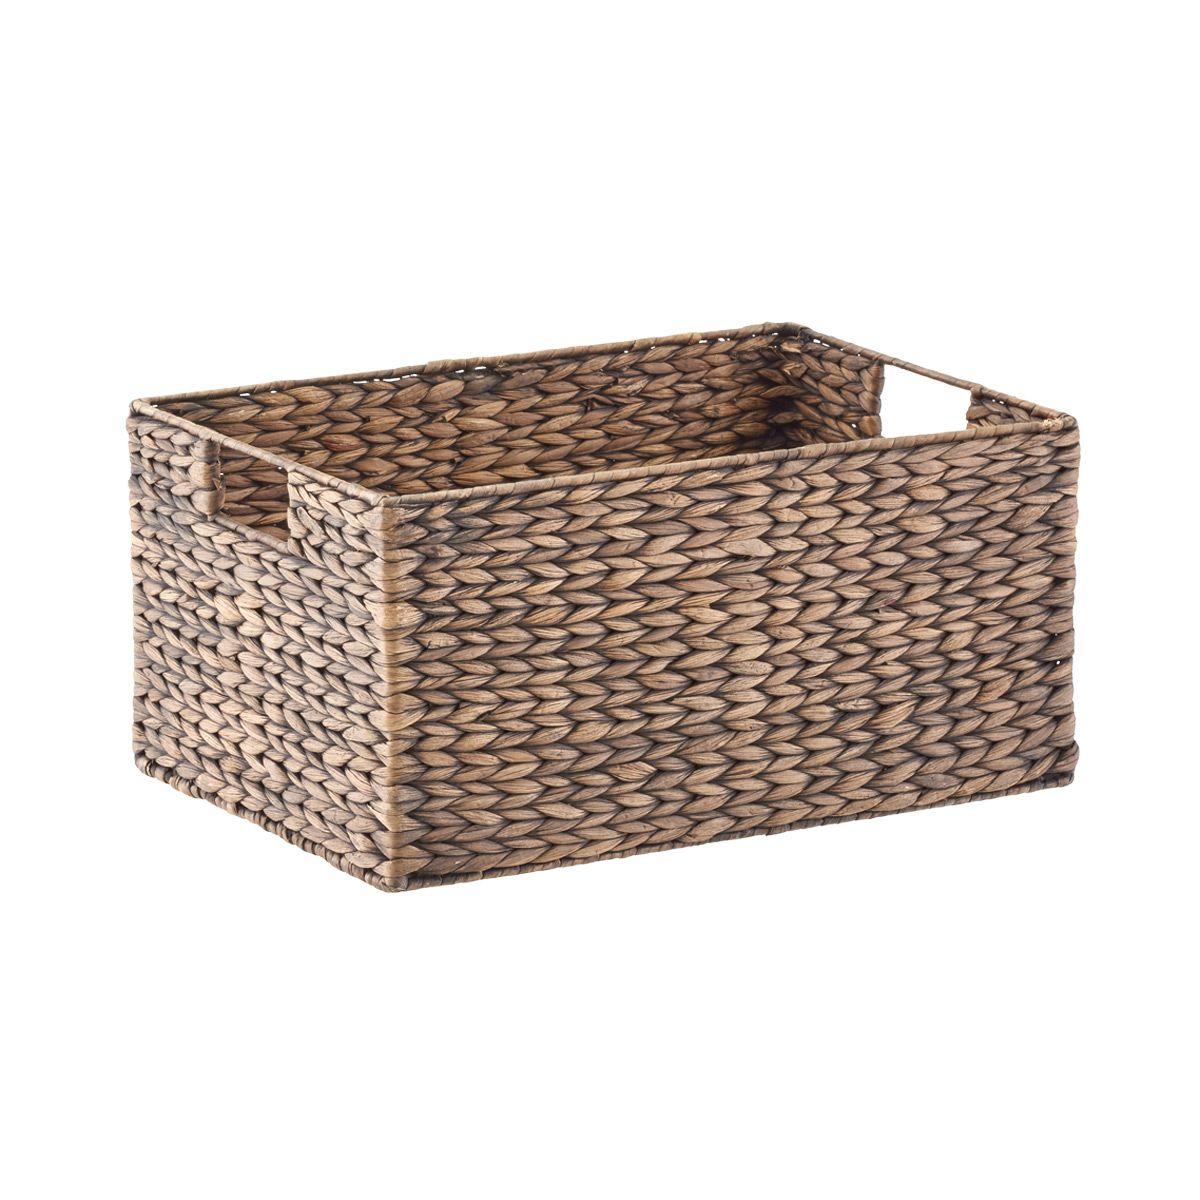 Medium Water Hyacinth Bin Mocha Brown | The Container Store